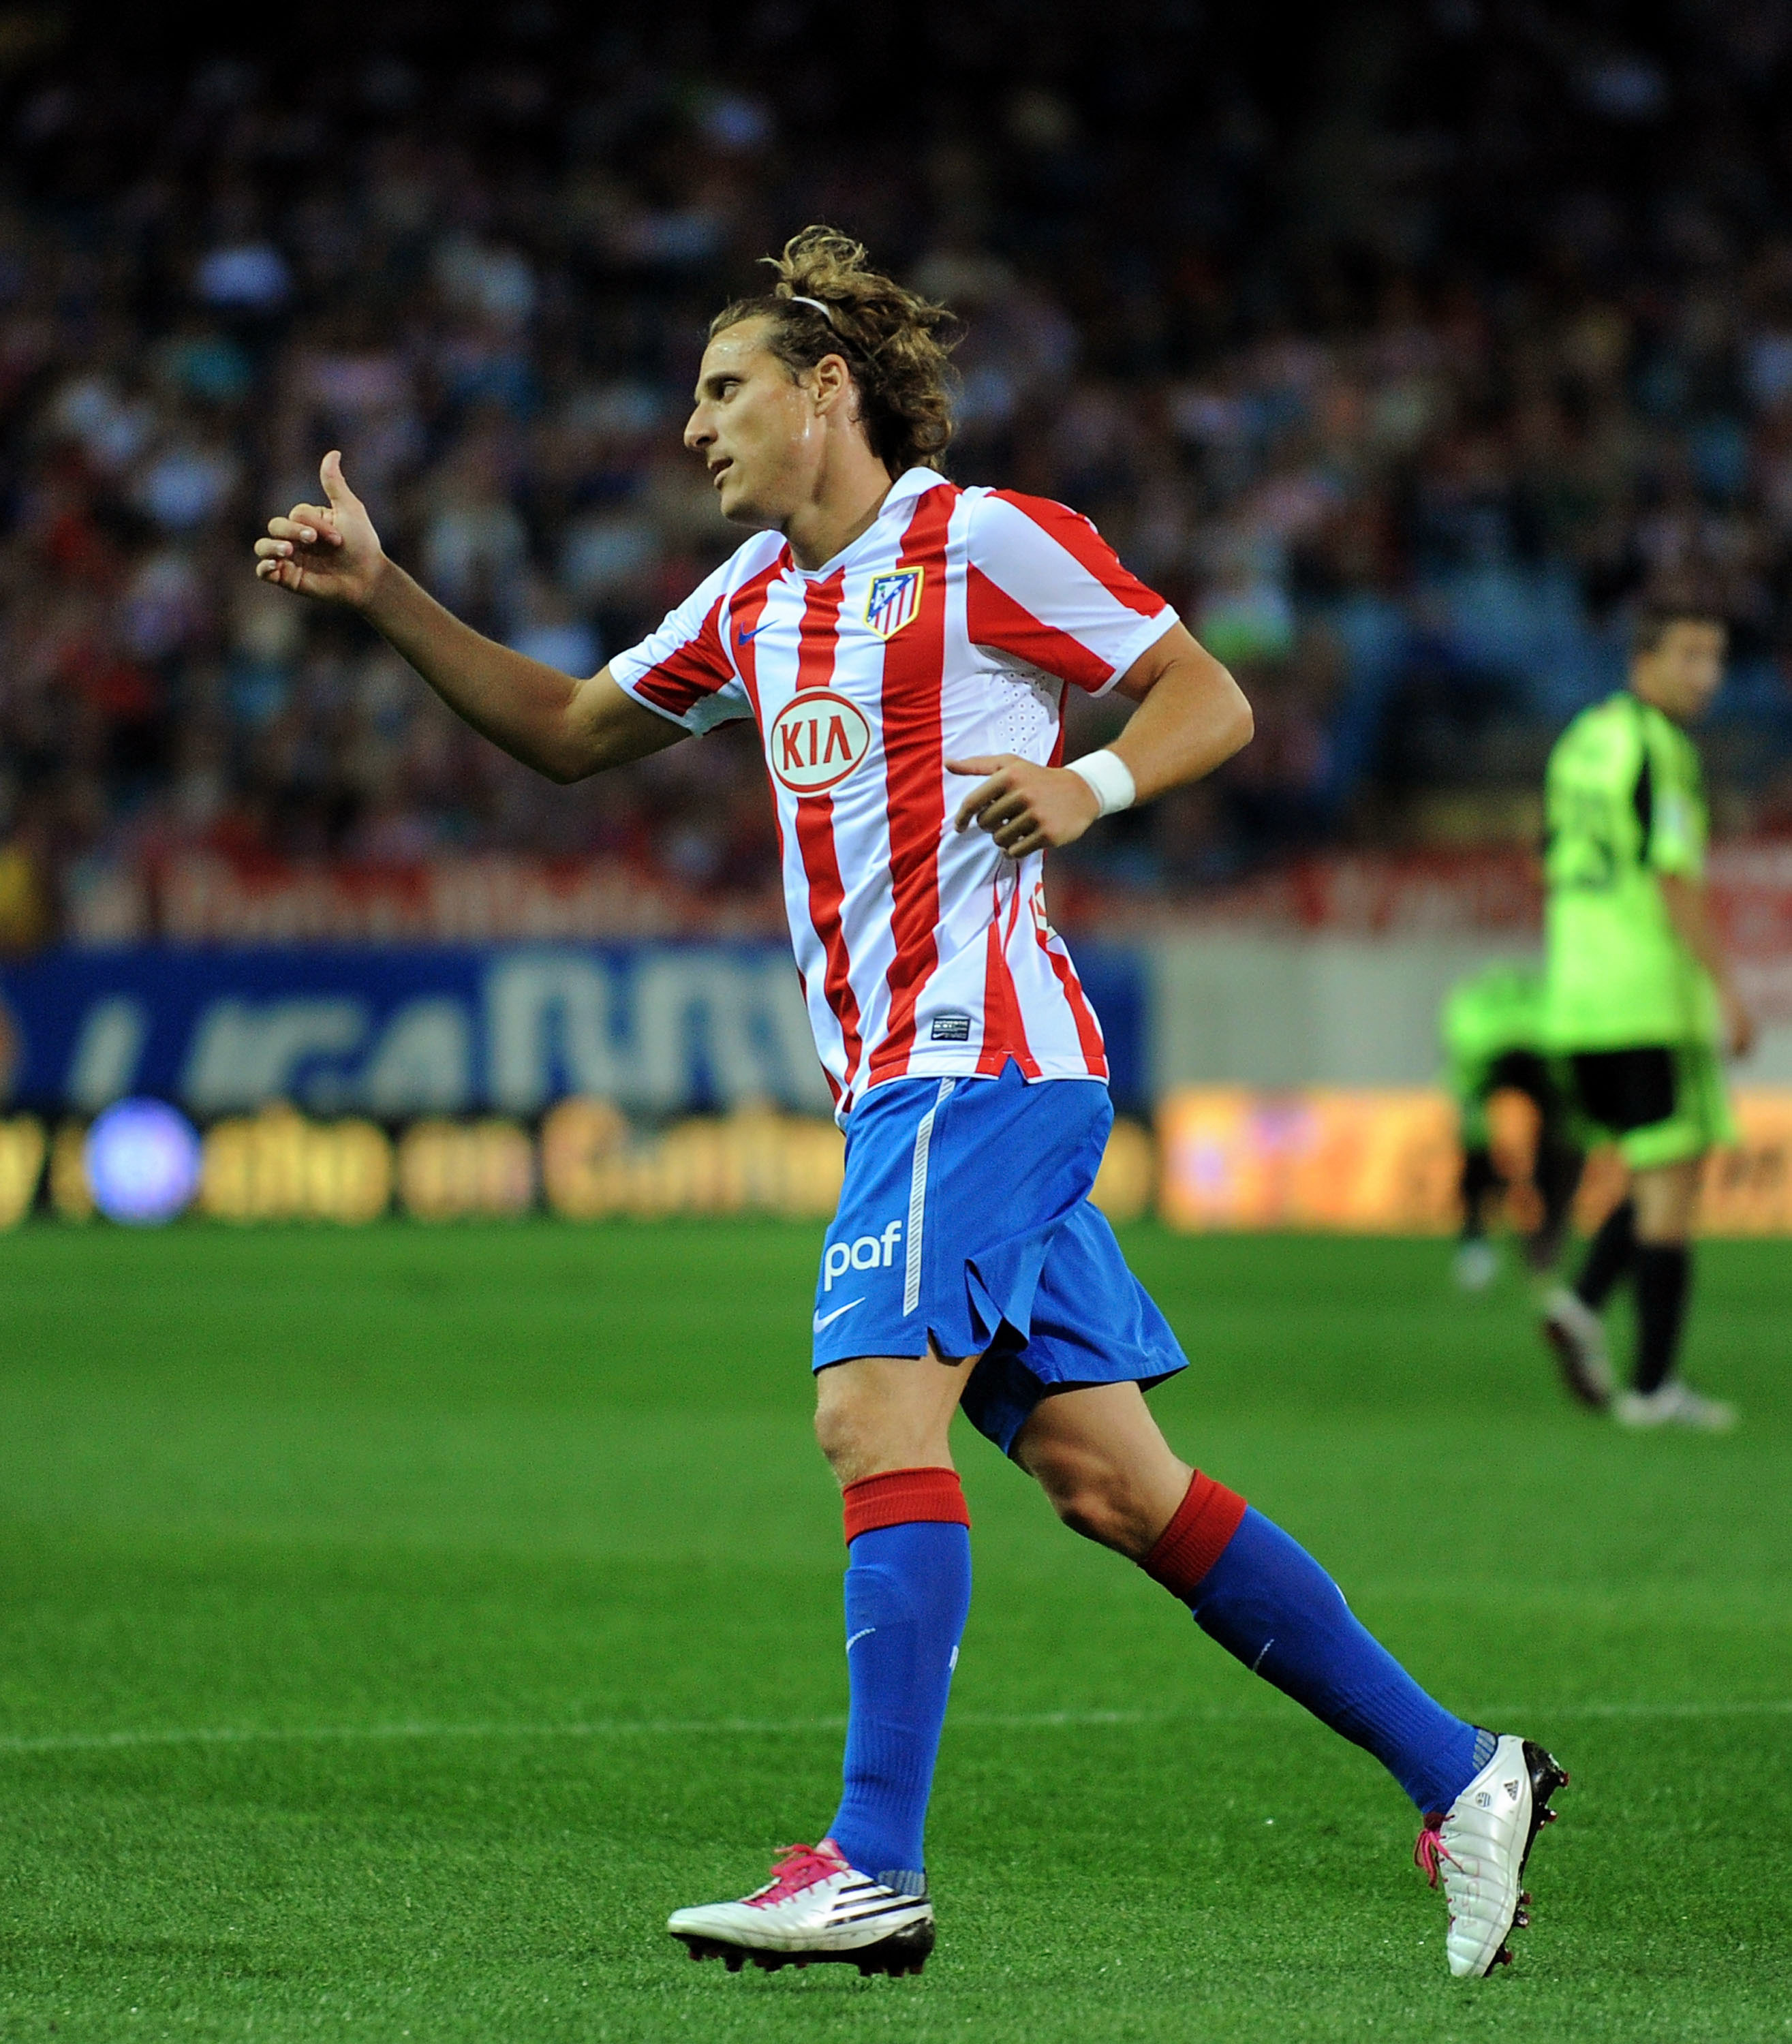 MADRID, SPAIN - SEPTEMBER 26: Diego Forlan of Atletico Madrid signals to a teammate during the La Liga match between Atletico Madrid and Real Zaragoza at the Vicente Calderon stadium on September 26, 2010 in Madrid, Spain.  (Photo by Denis Doyle/Getty Ima